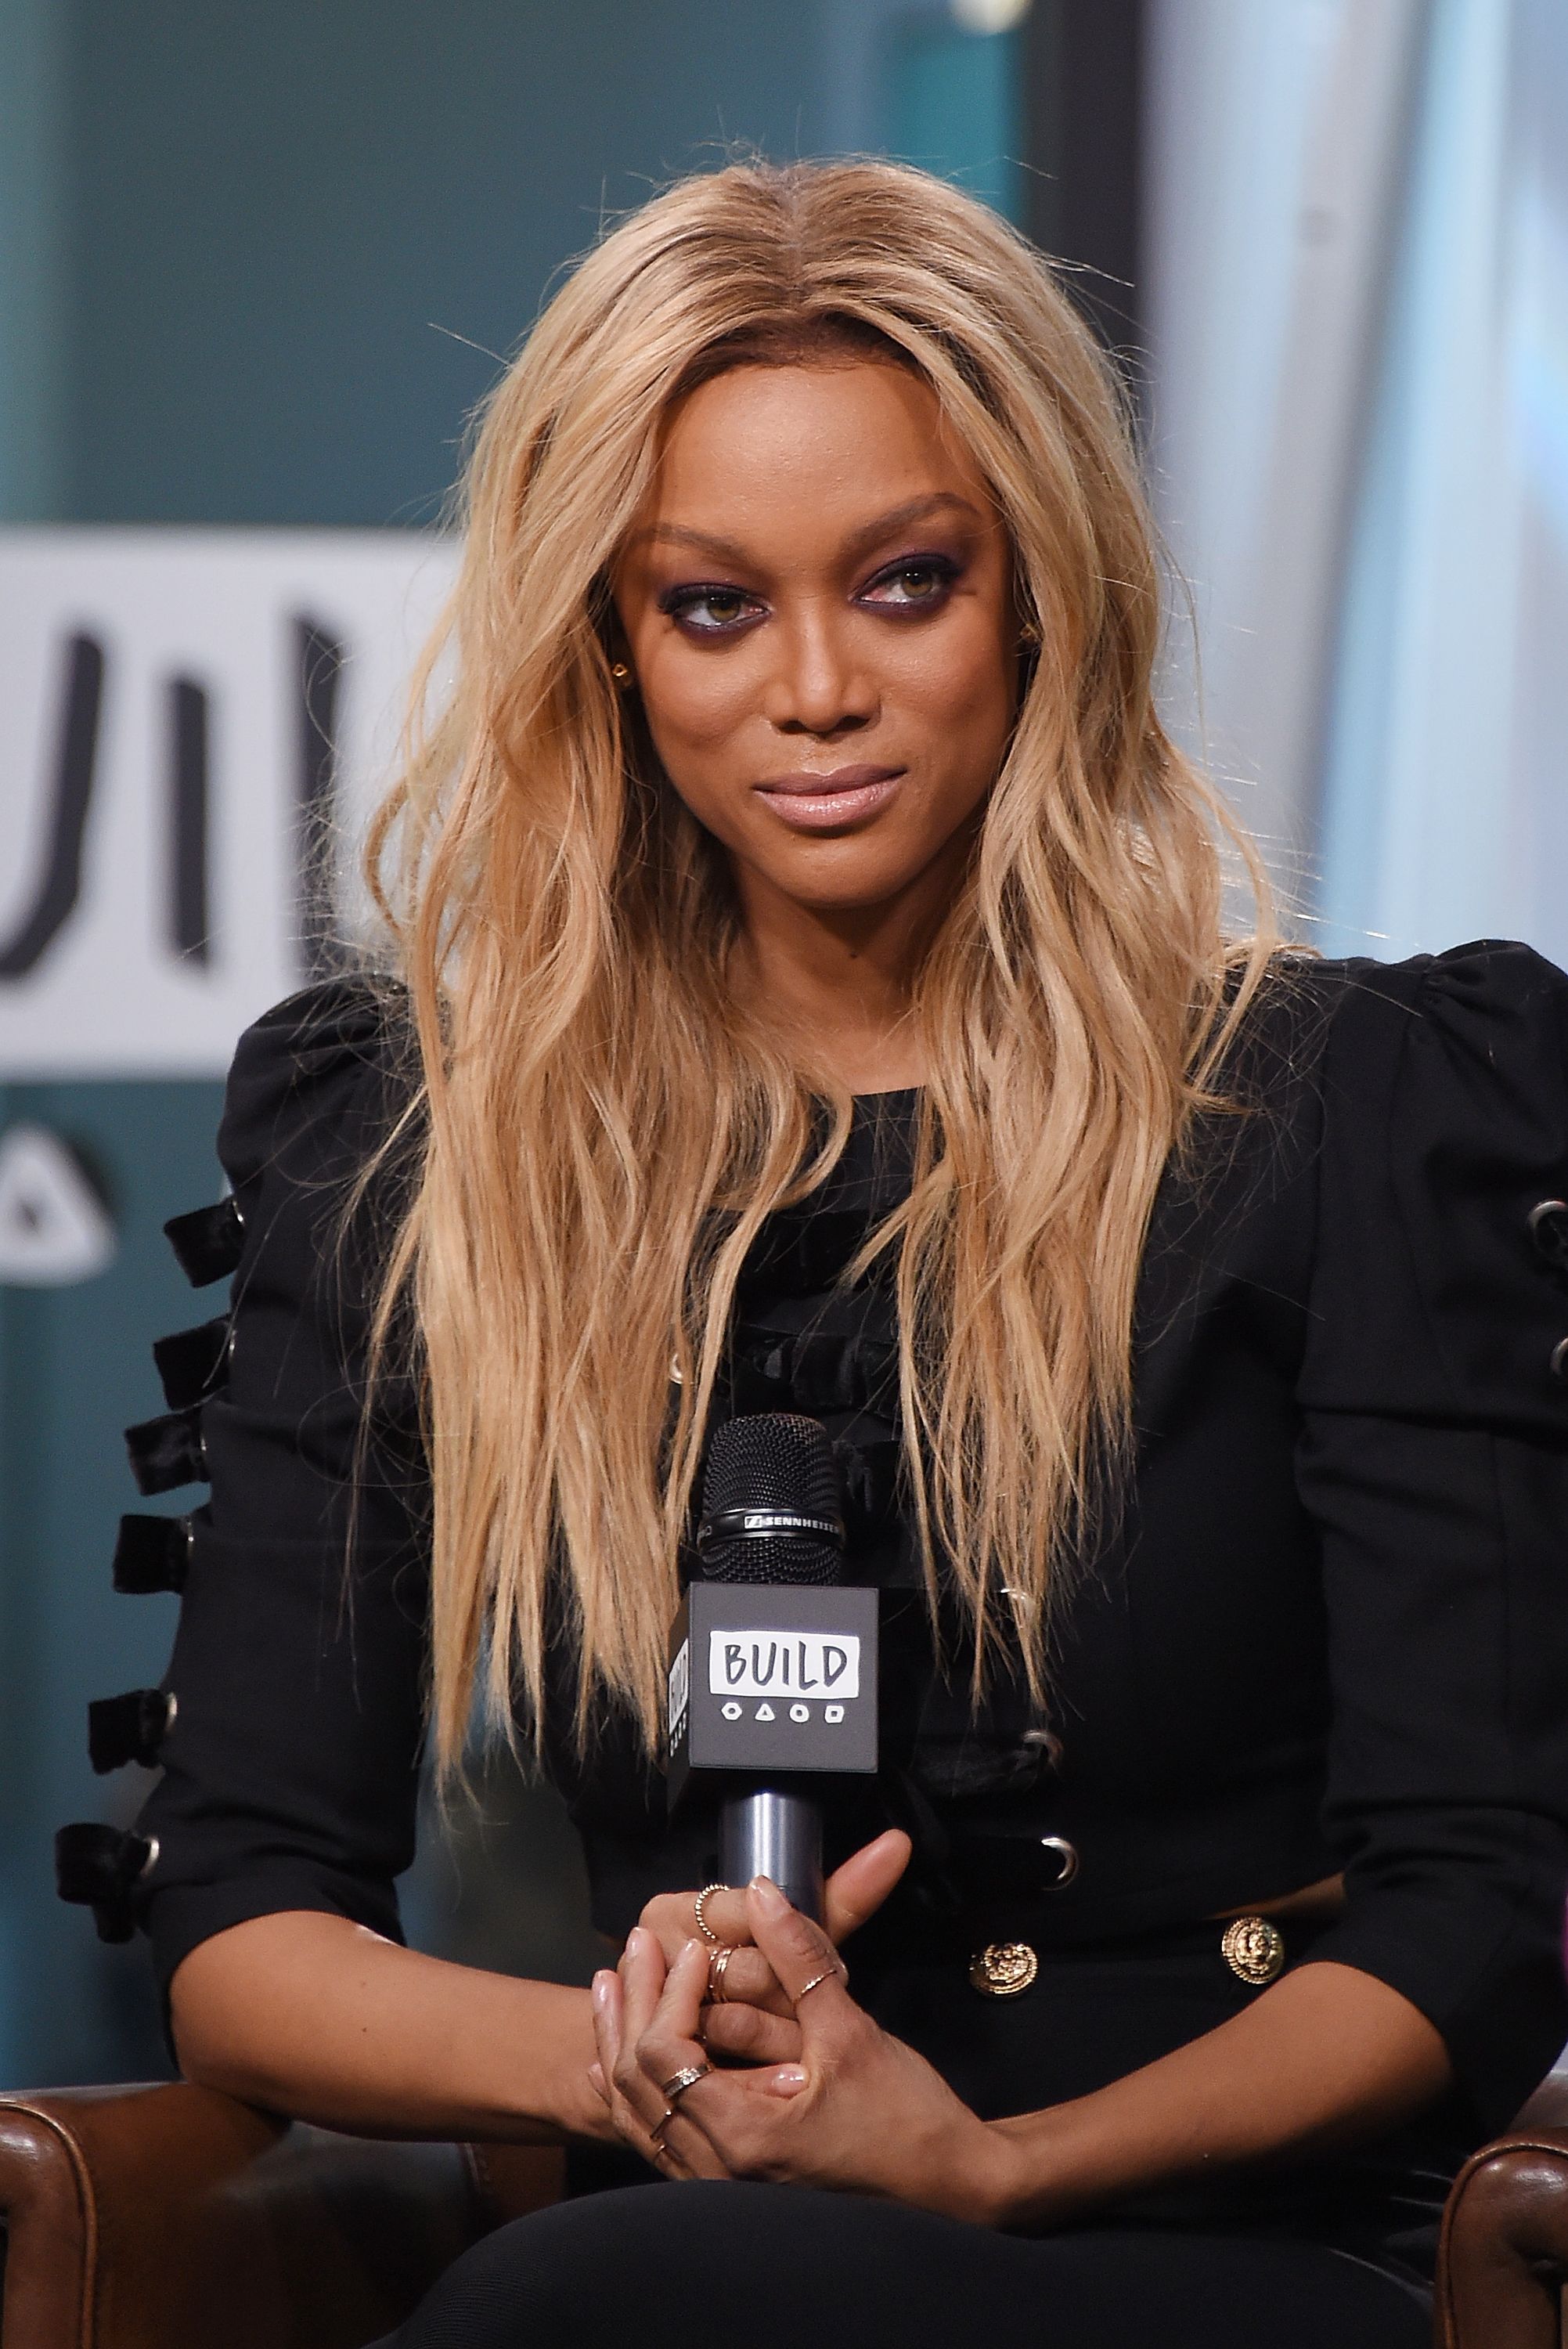 Tyra Banks at the Build Studio to discuss the show "America's Next Top Model" on January 9, 2018. | Photo: Getty Images